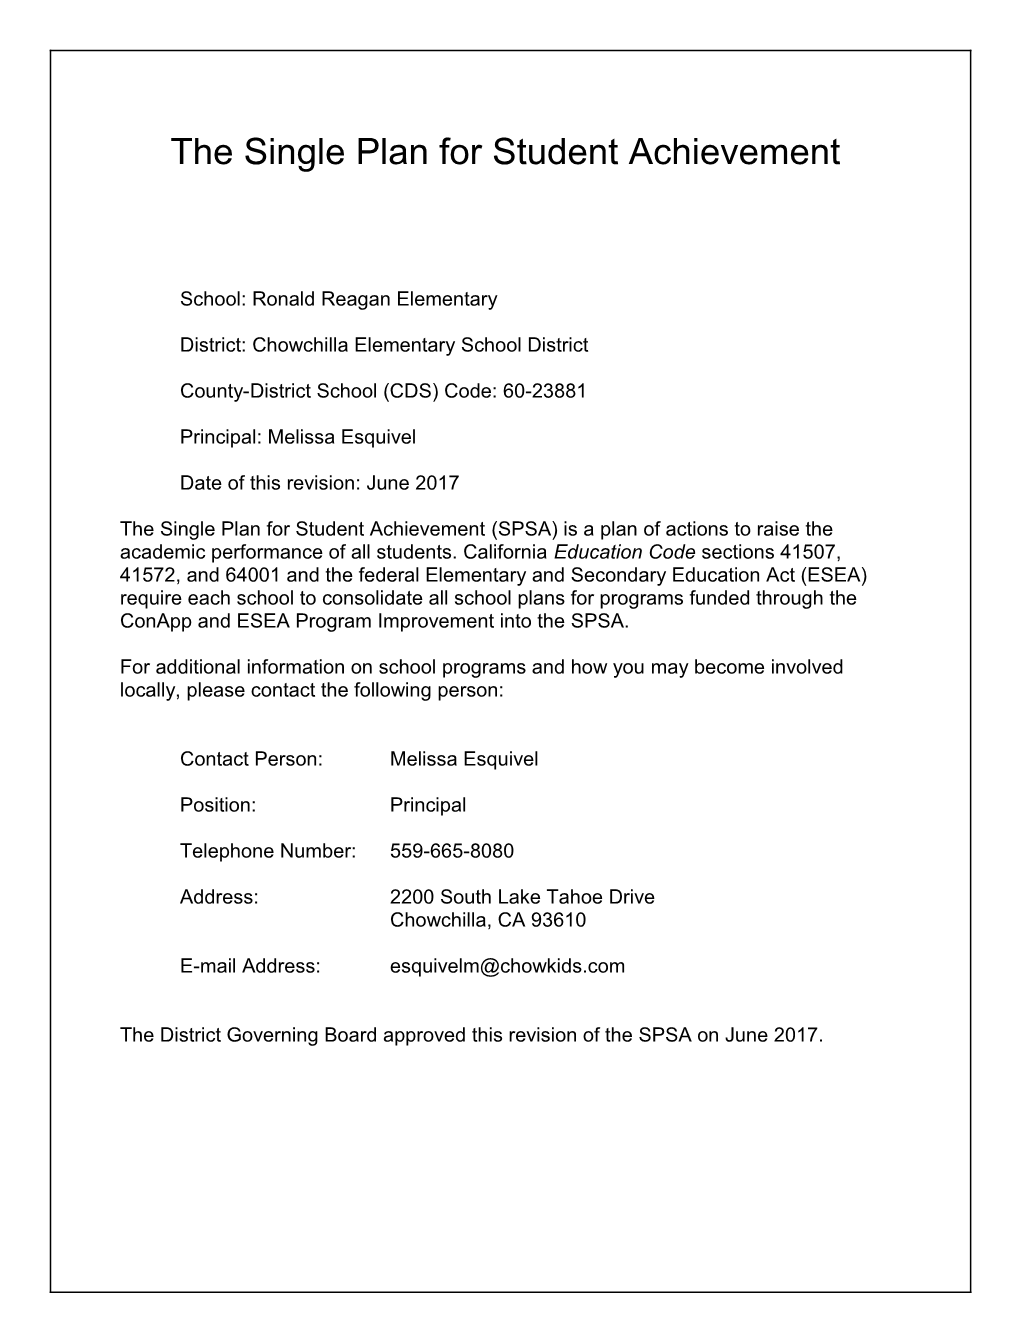 Single Plan for Student Achievement-Part II - Local Educational Agency Plan (CA Dept Of